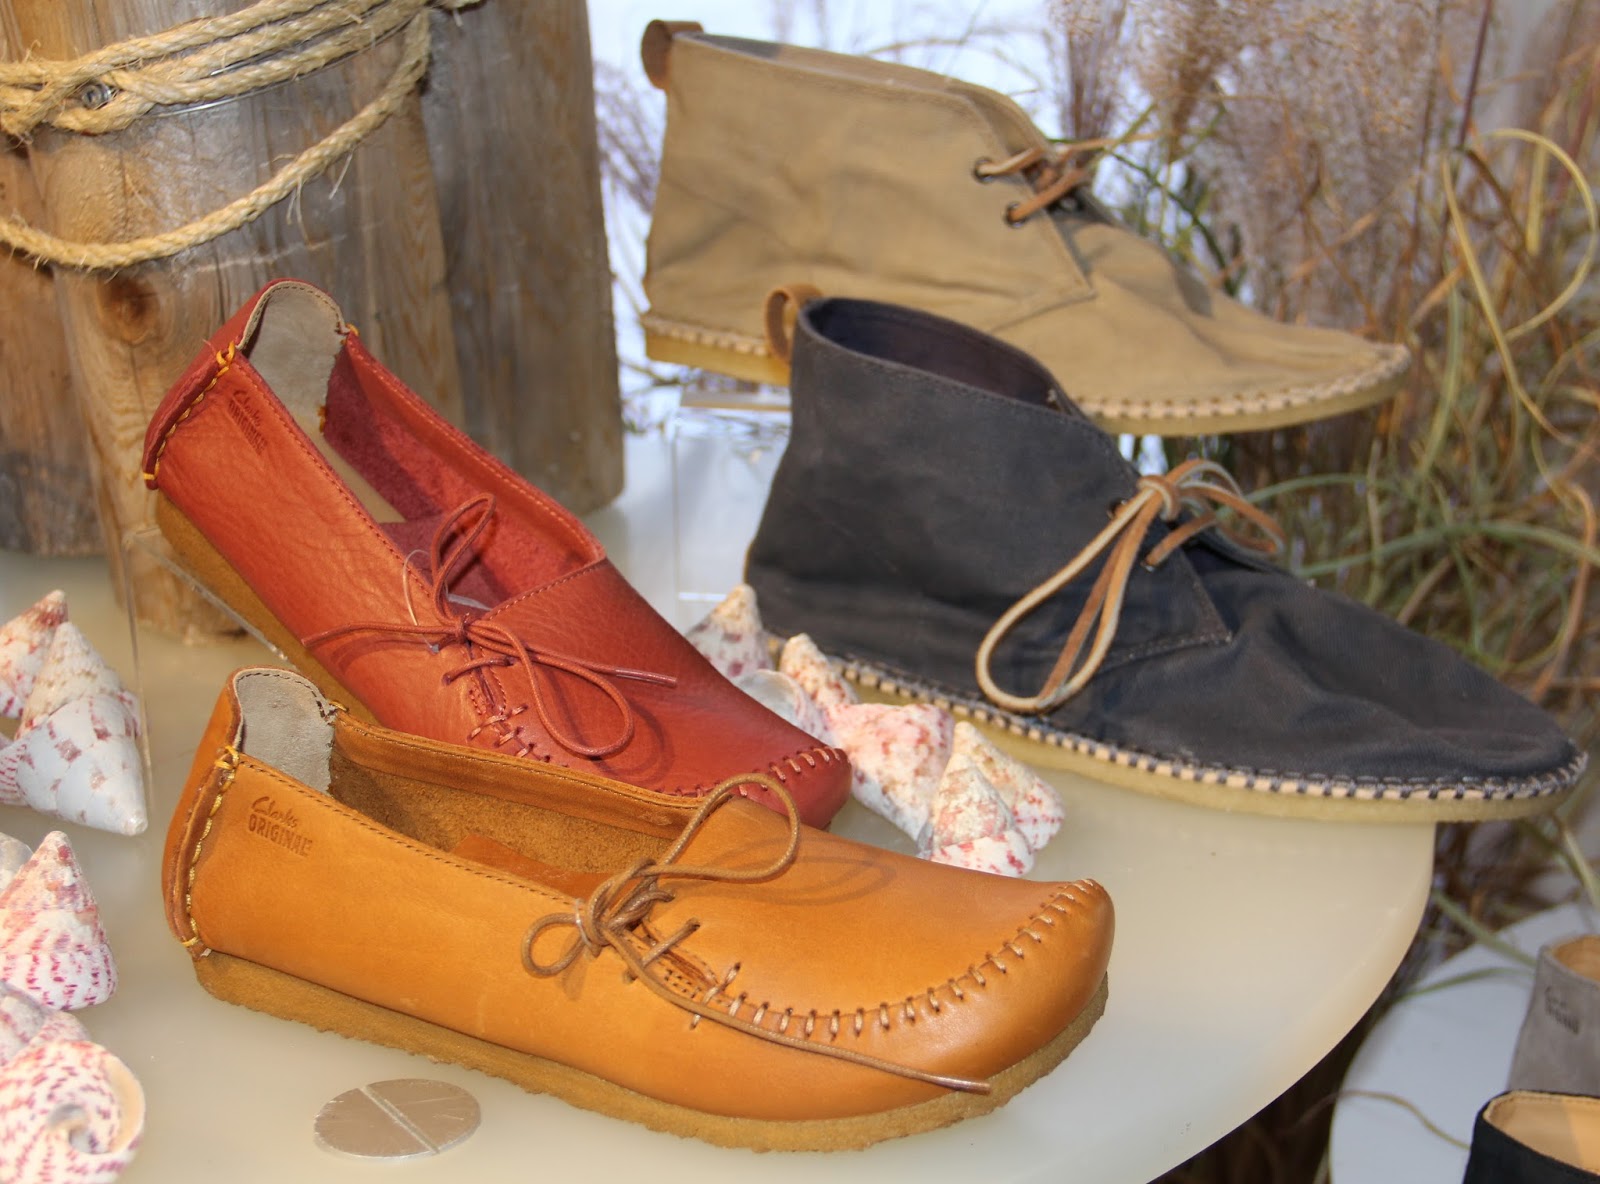 CLARKS ORIGINALS=New Collaborations-SAILING CLARKS+MUSTO Spring 2014